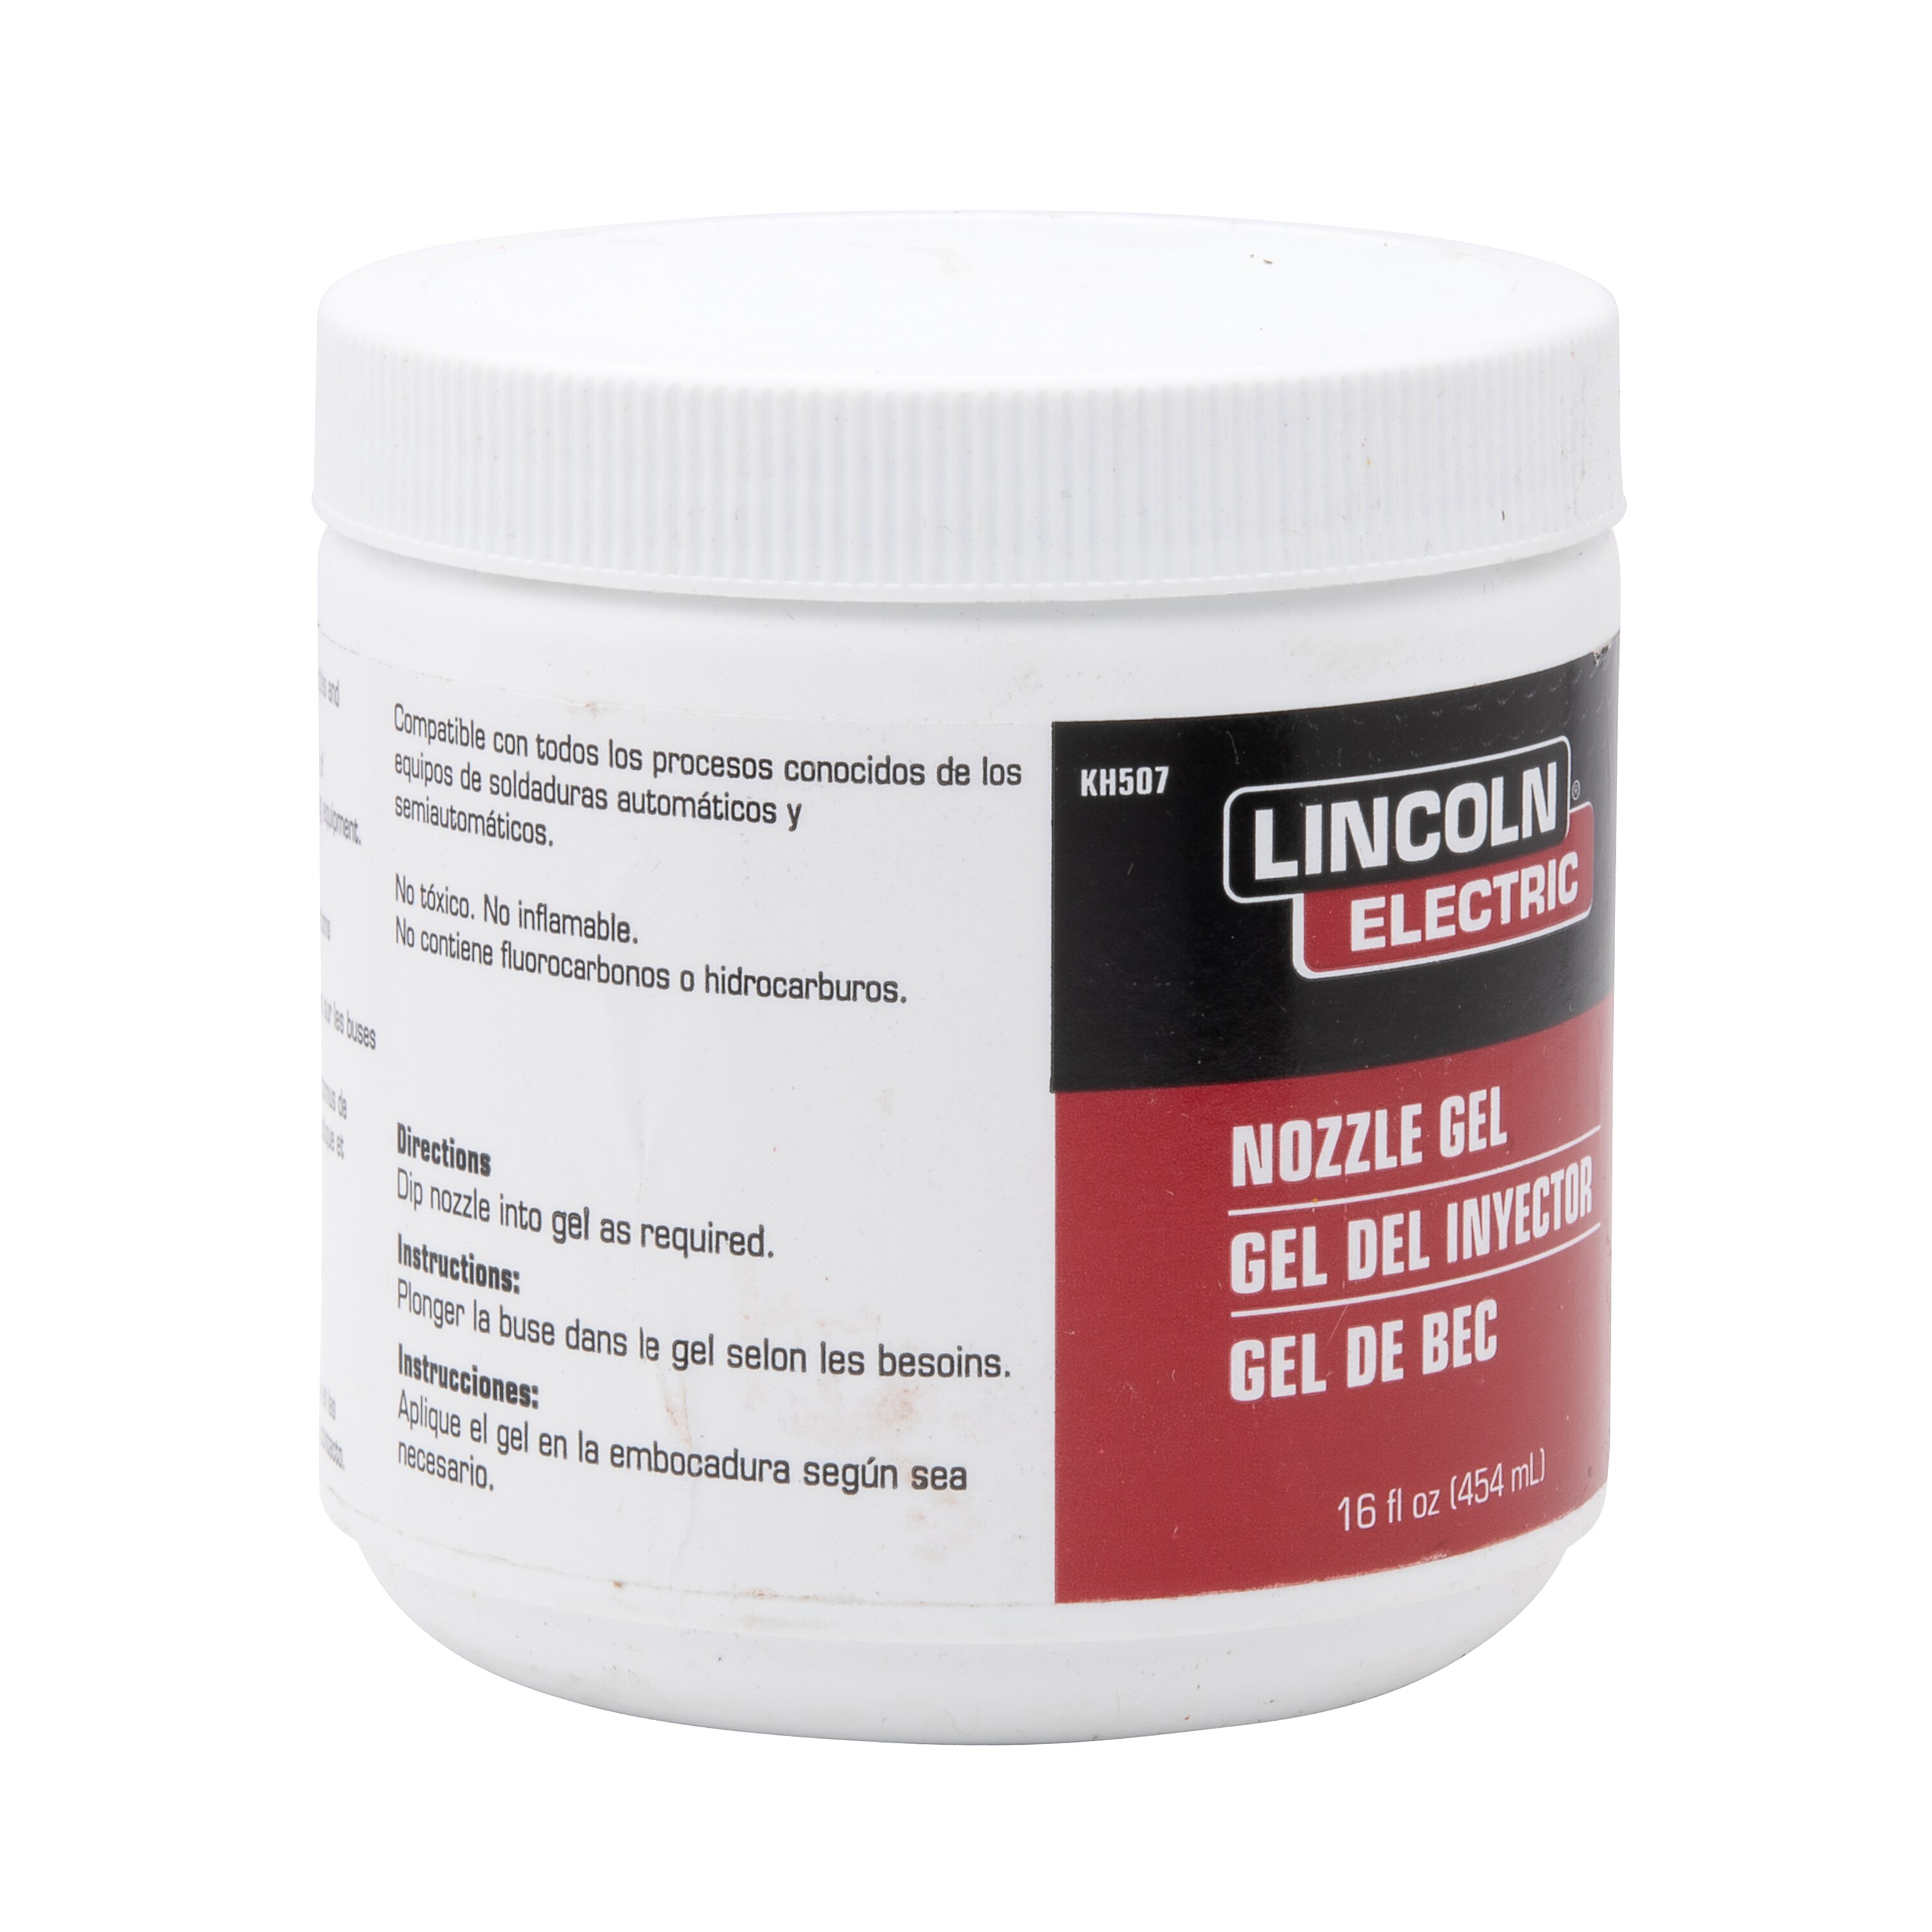 Lincoln Electric Kh507 Welding Nozzle Gel, 16 oz